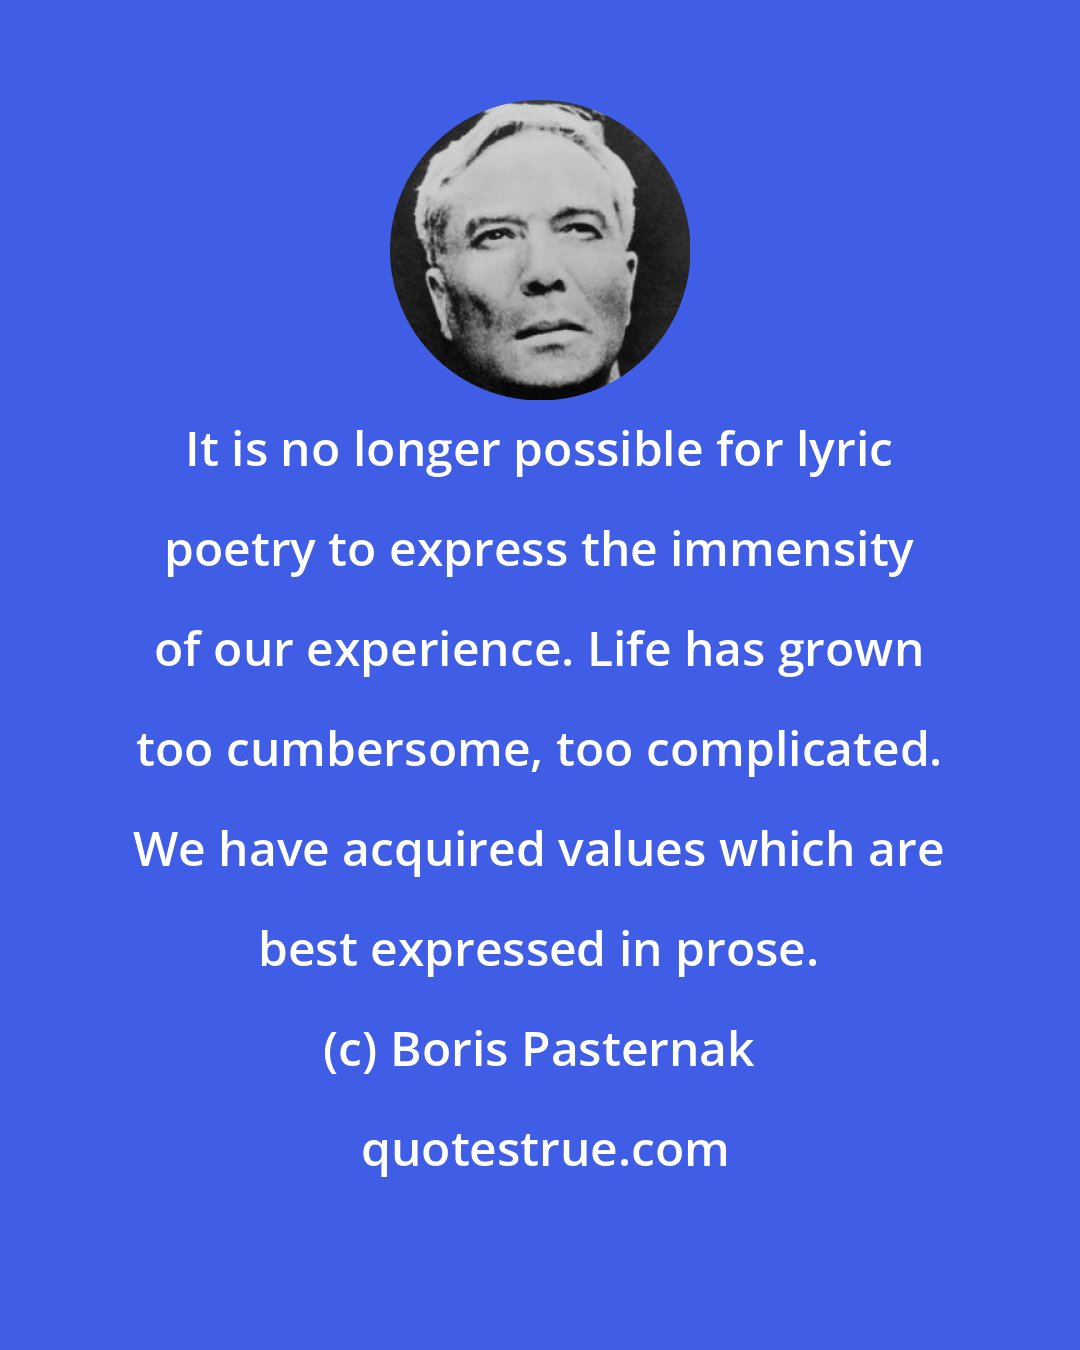 Boris Pasternak: It is no longer possible for lyric poetry to express the immensity of our experience. Life has grown too cumbersome, too complicated. We have acquired values which are best expressed in prose.